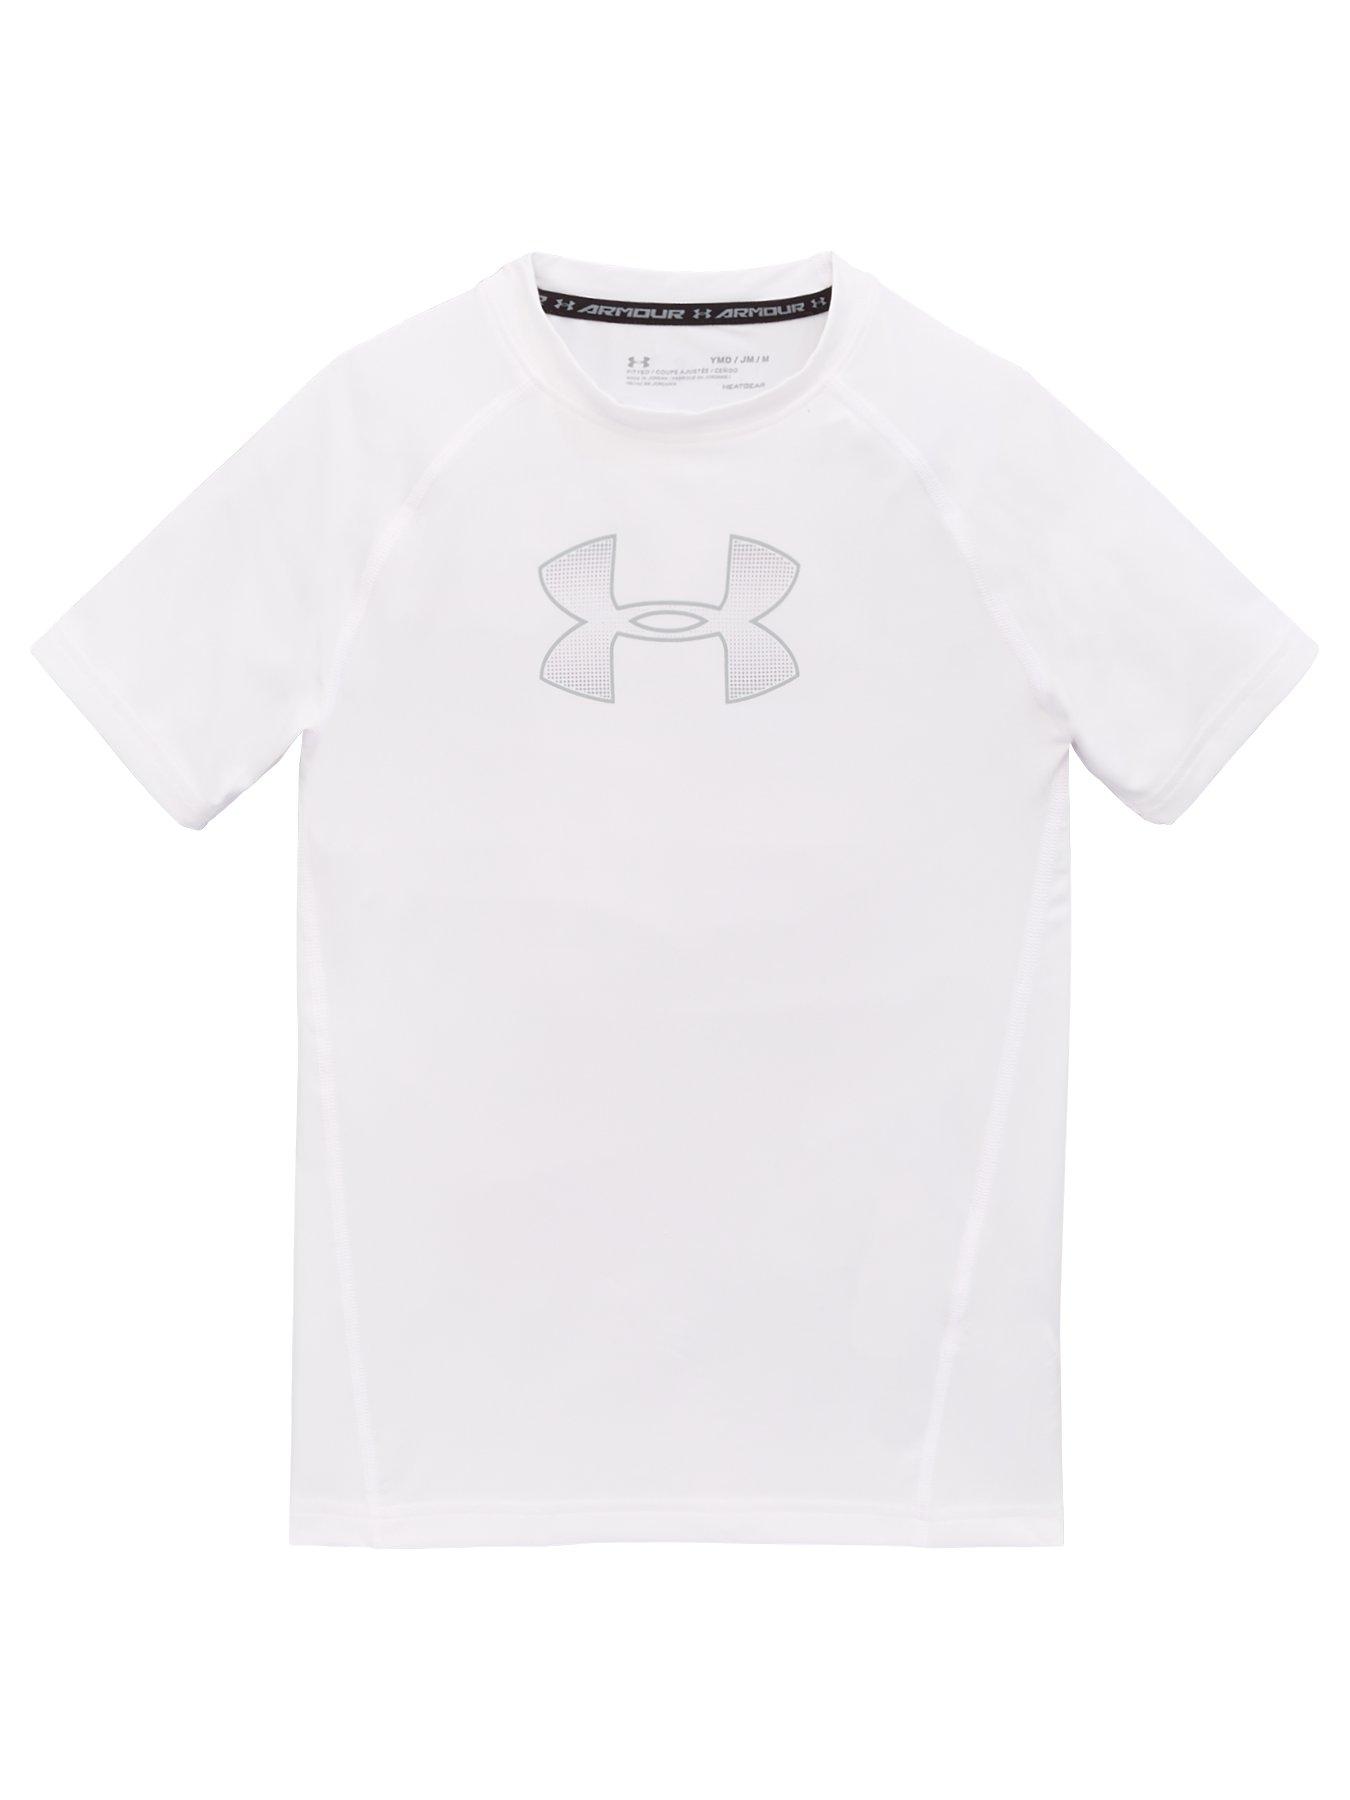 white under armour shirt youth